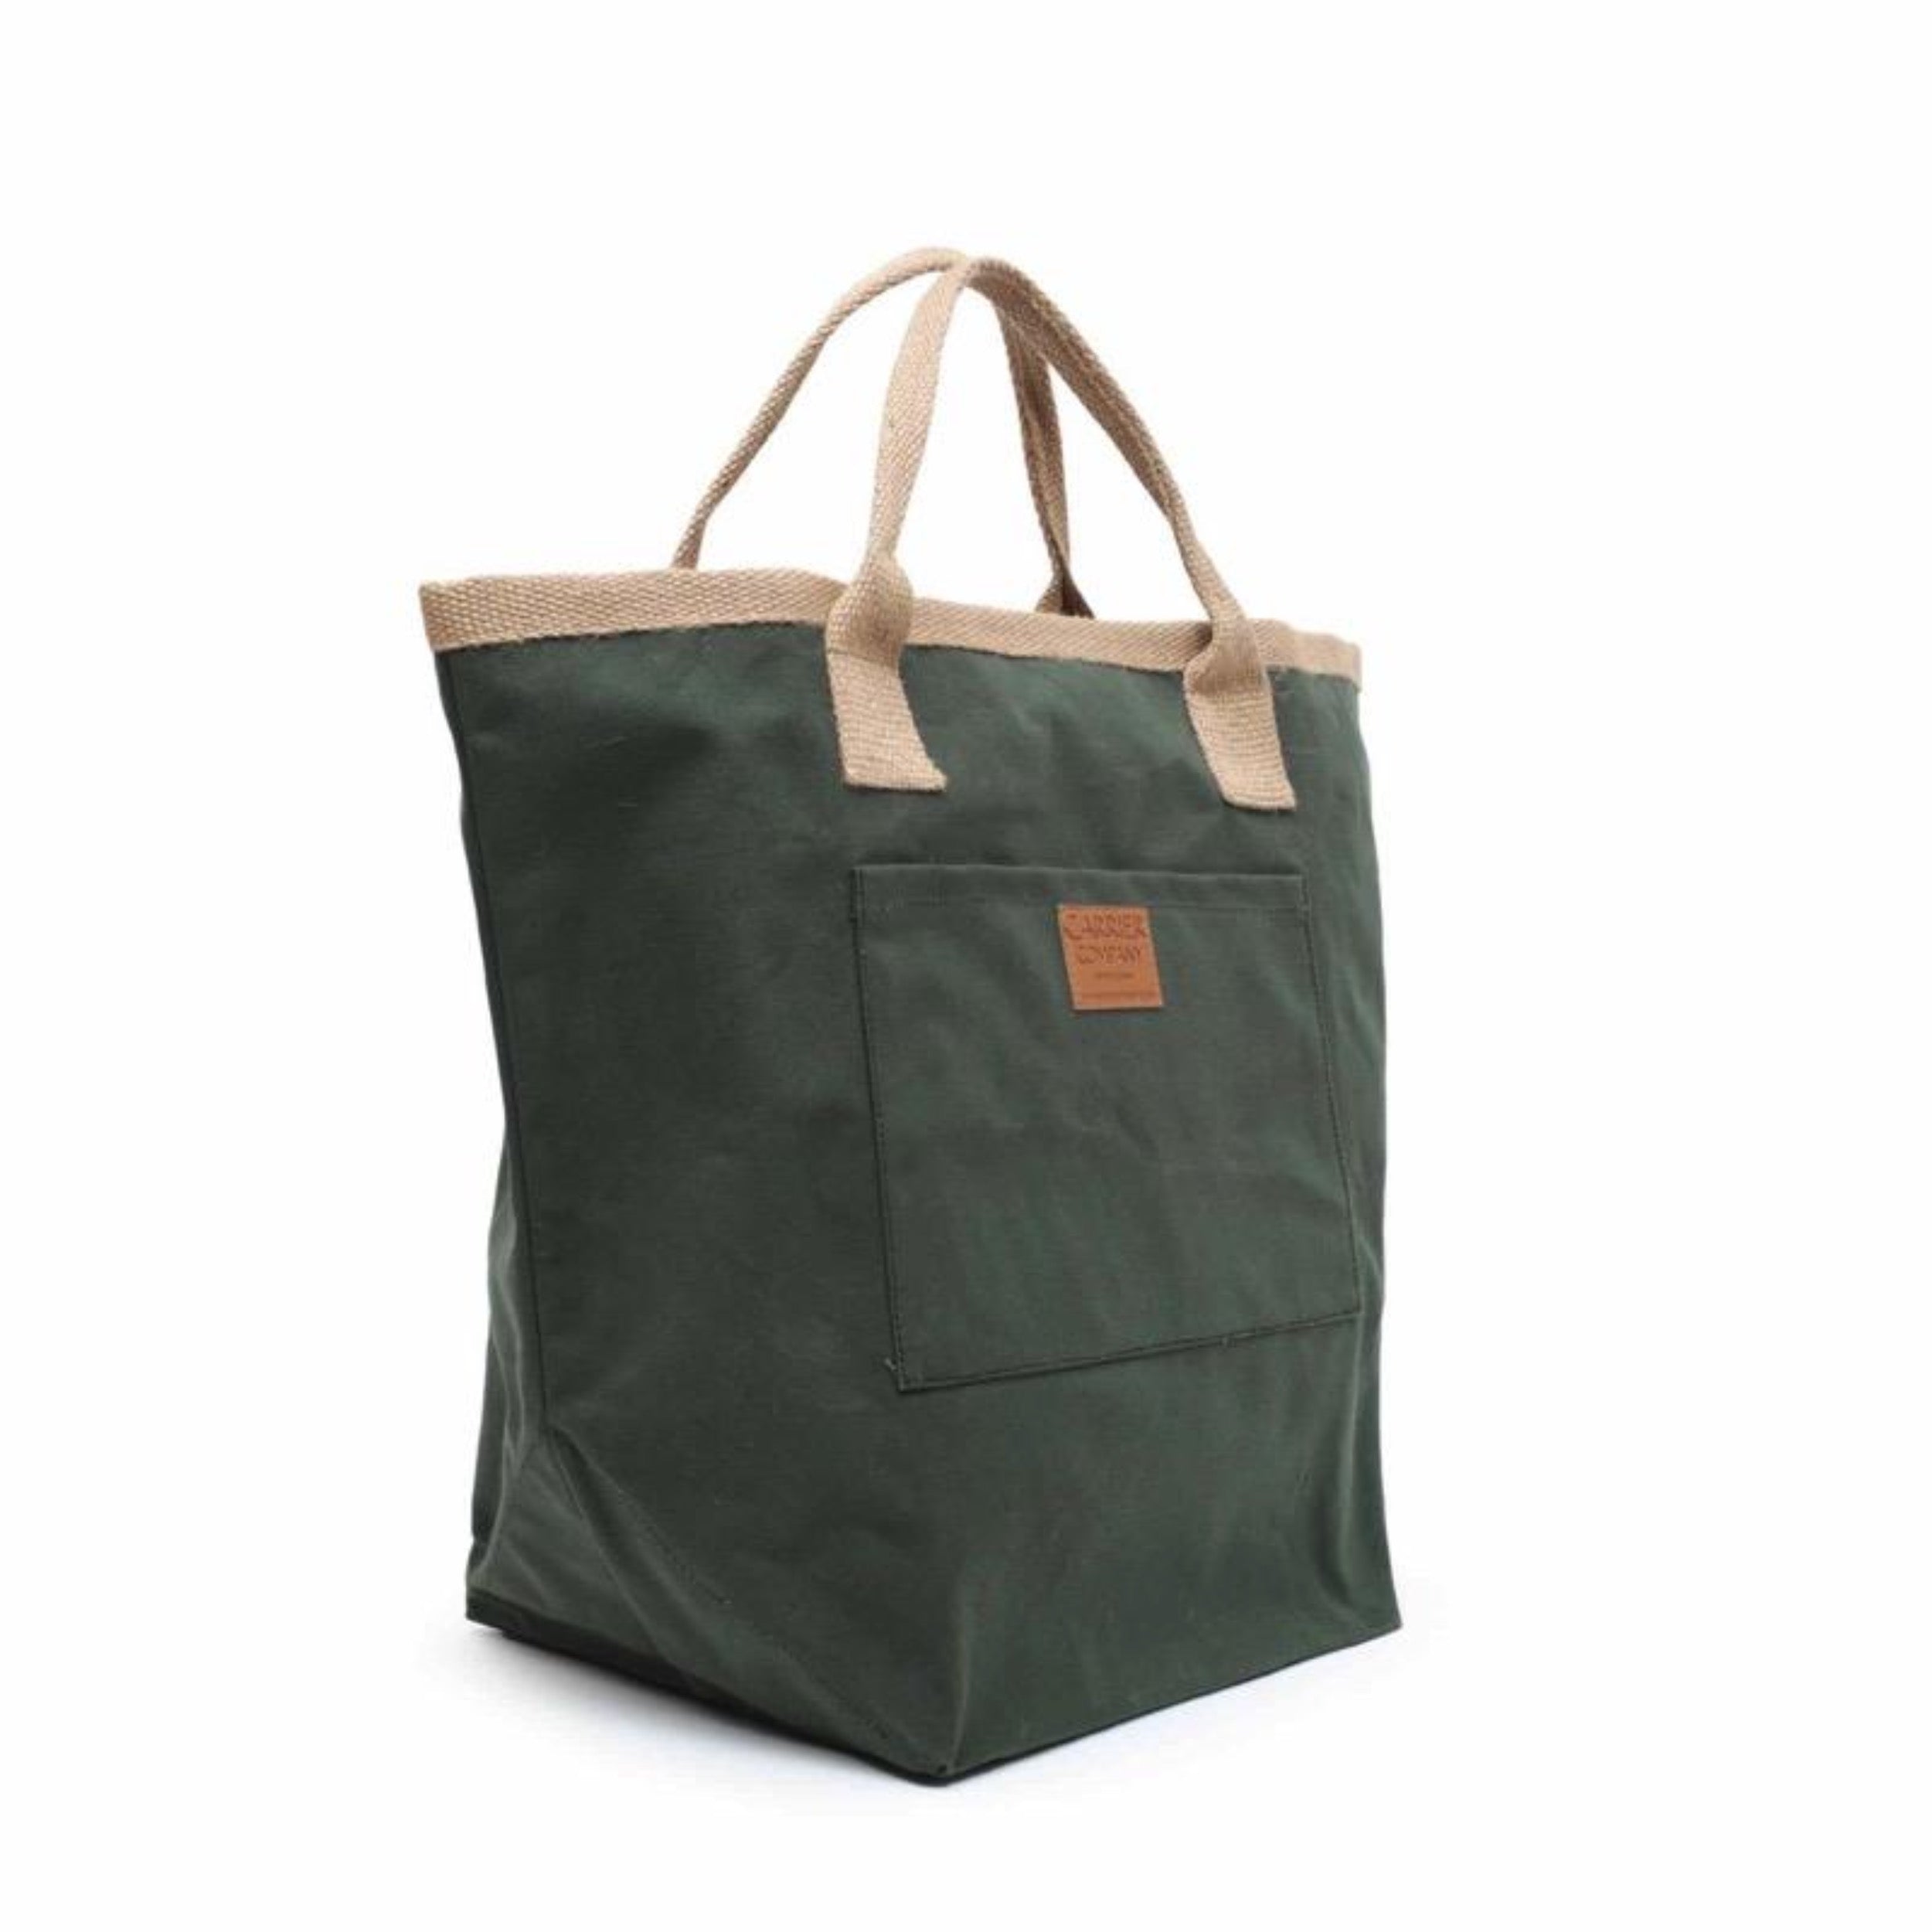 Carrier Company Loot and Boot Bag in Spruce Green